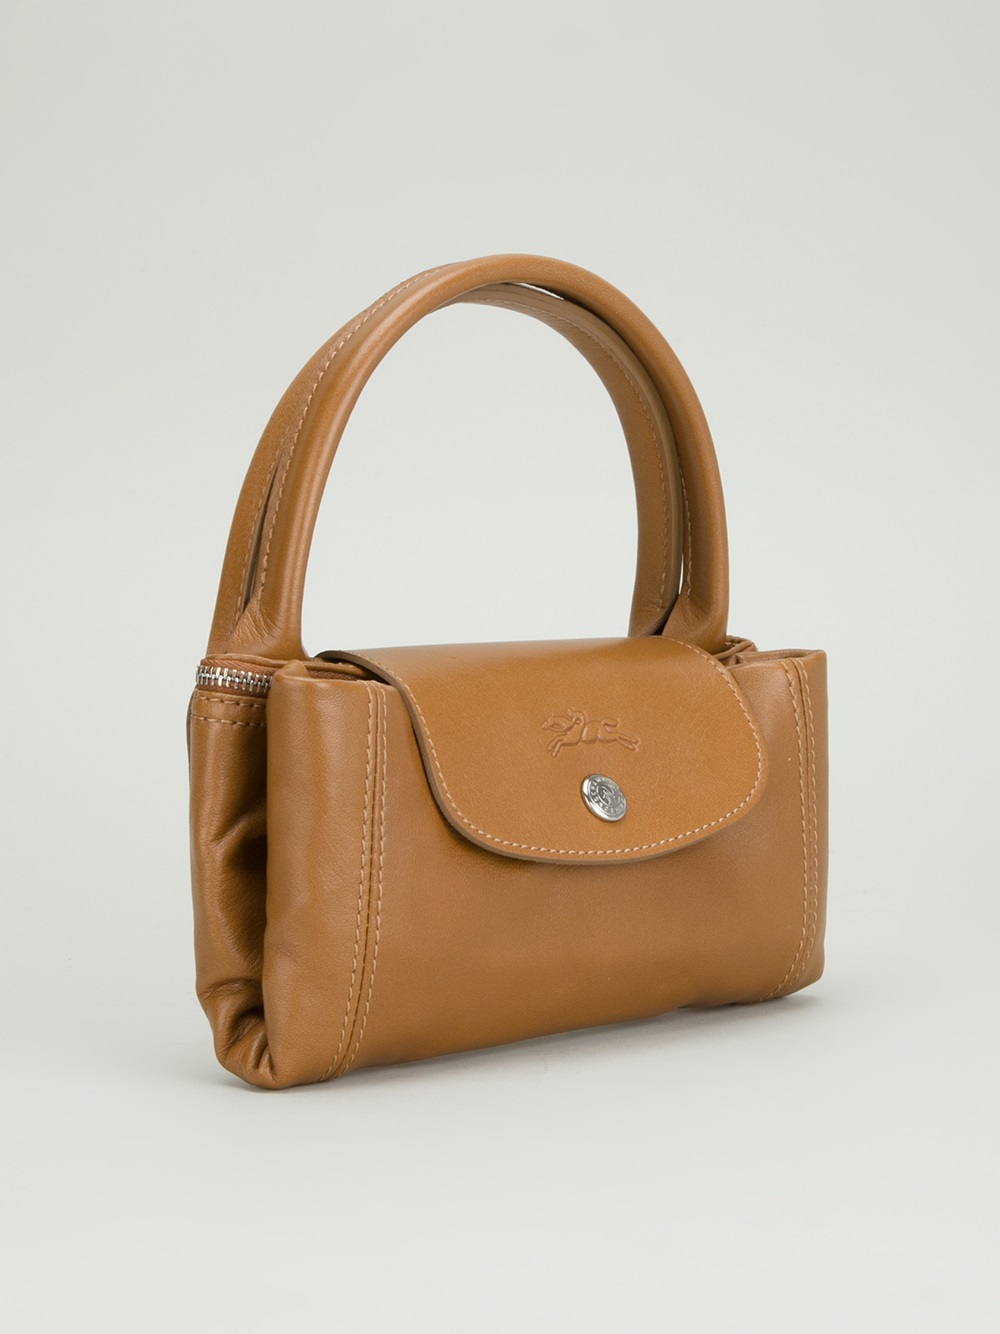 Pliage leather handbag Longchamp Brown in Leather - 34411279